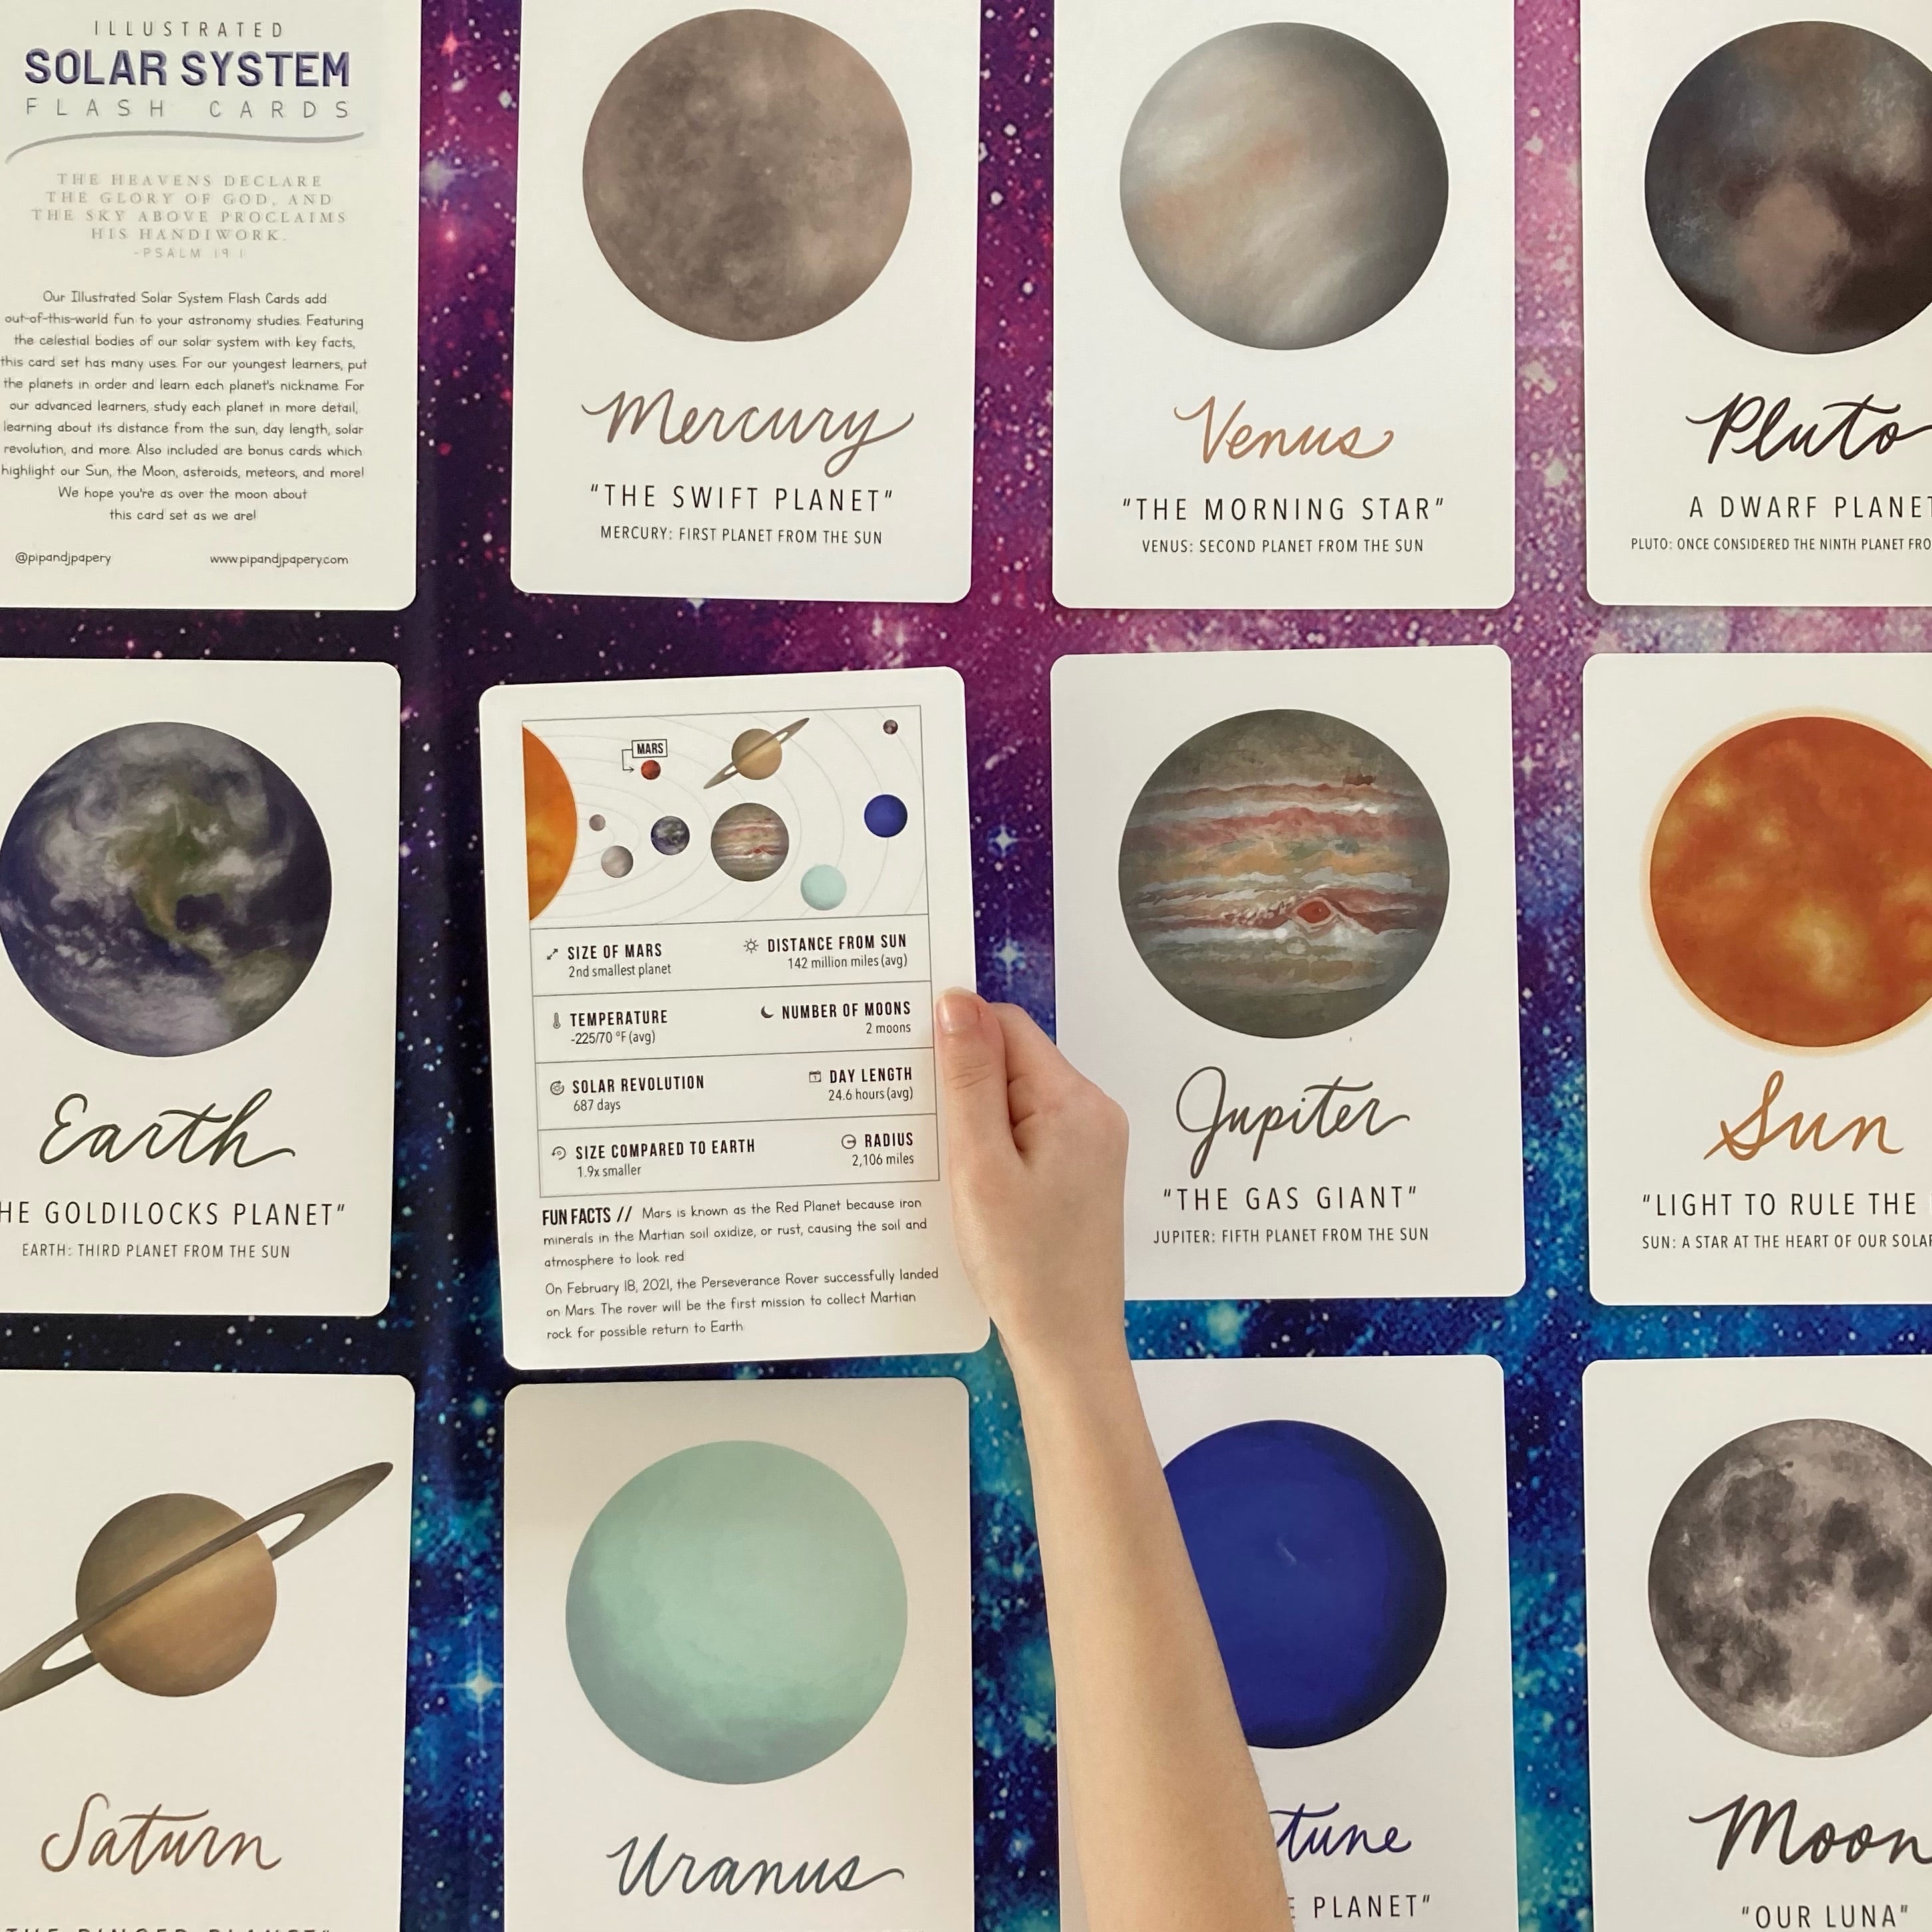 solar system fact cards